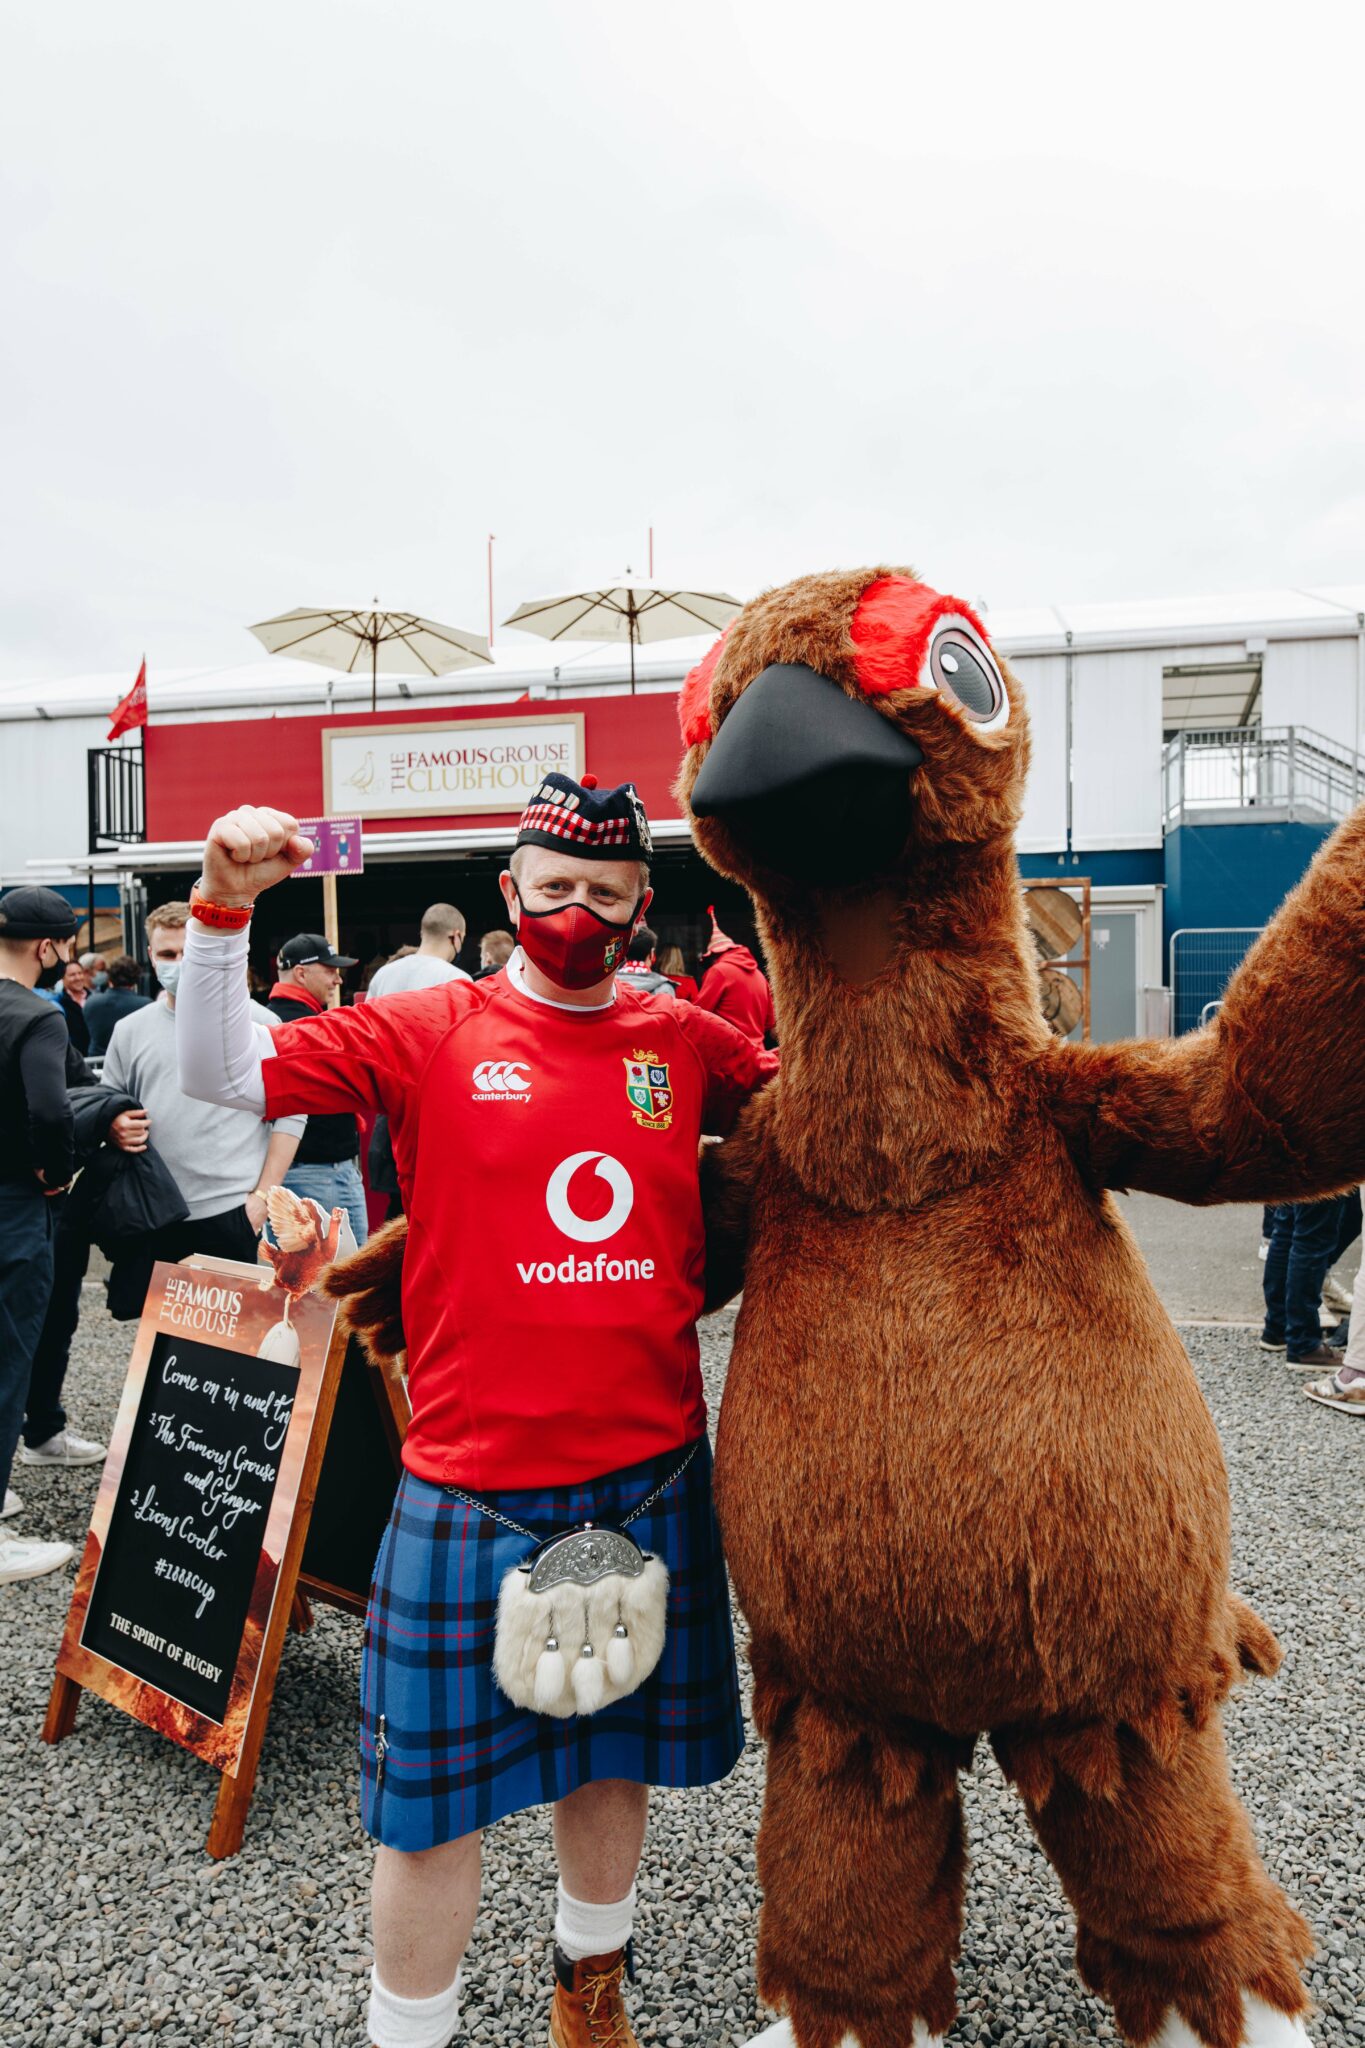 Famous-Grouse-rugby-activation-gilbert-mascot